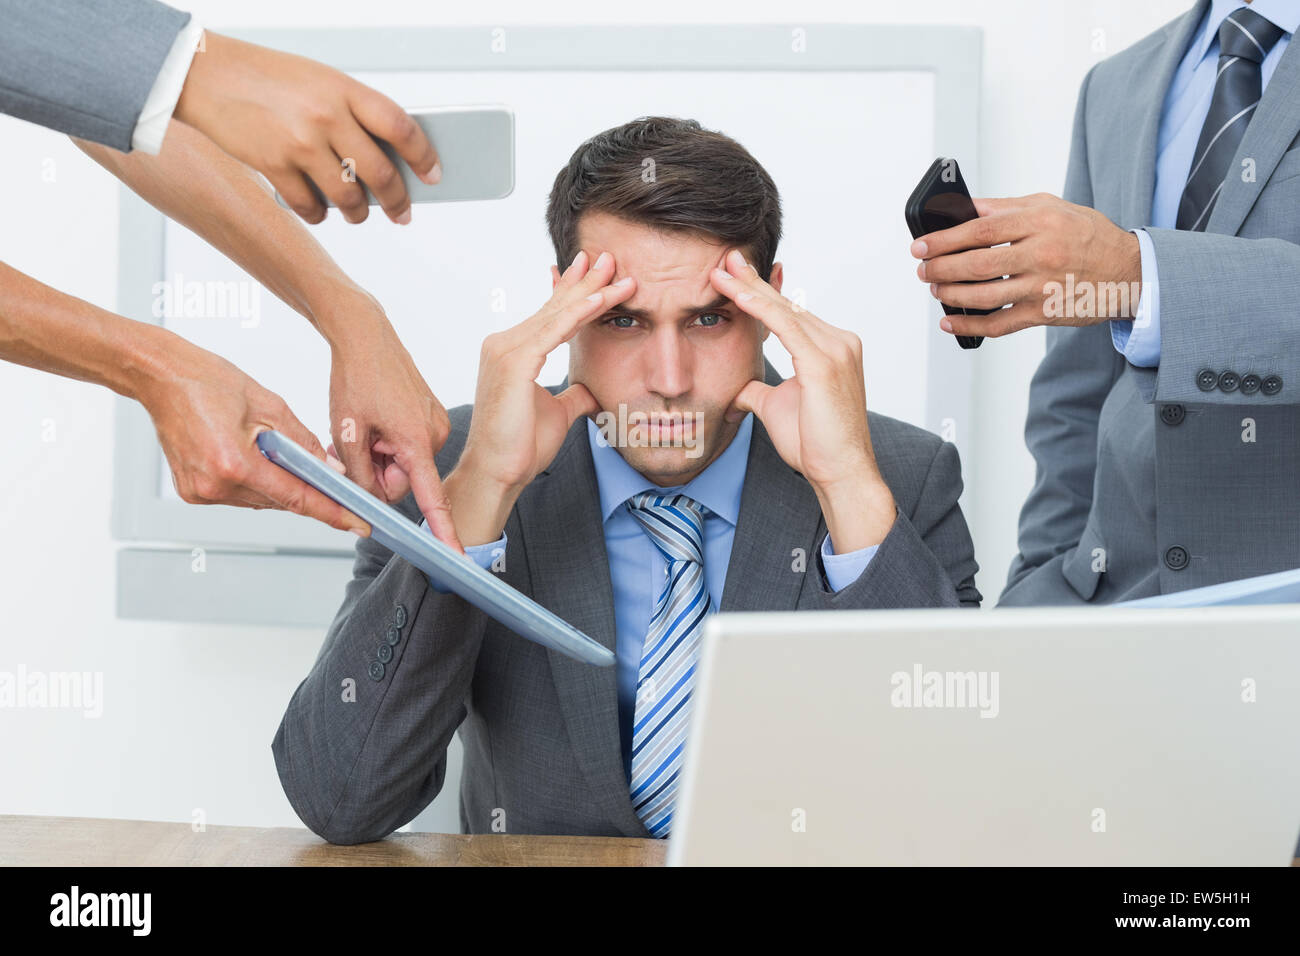 Worried businessman with head in hands Stock Photo